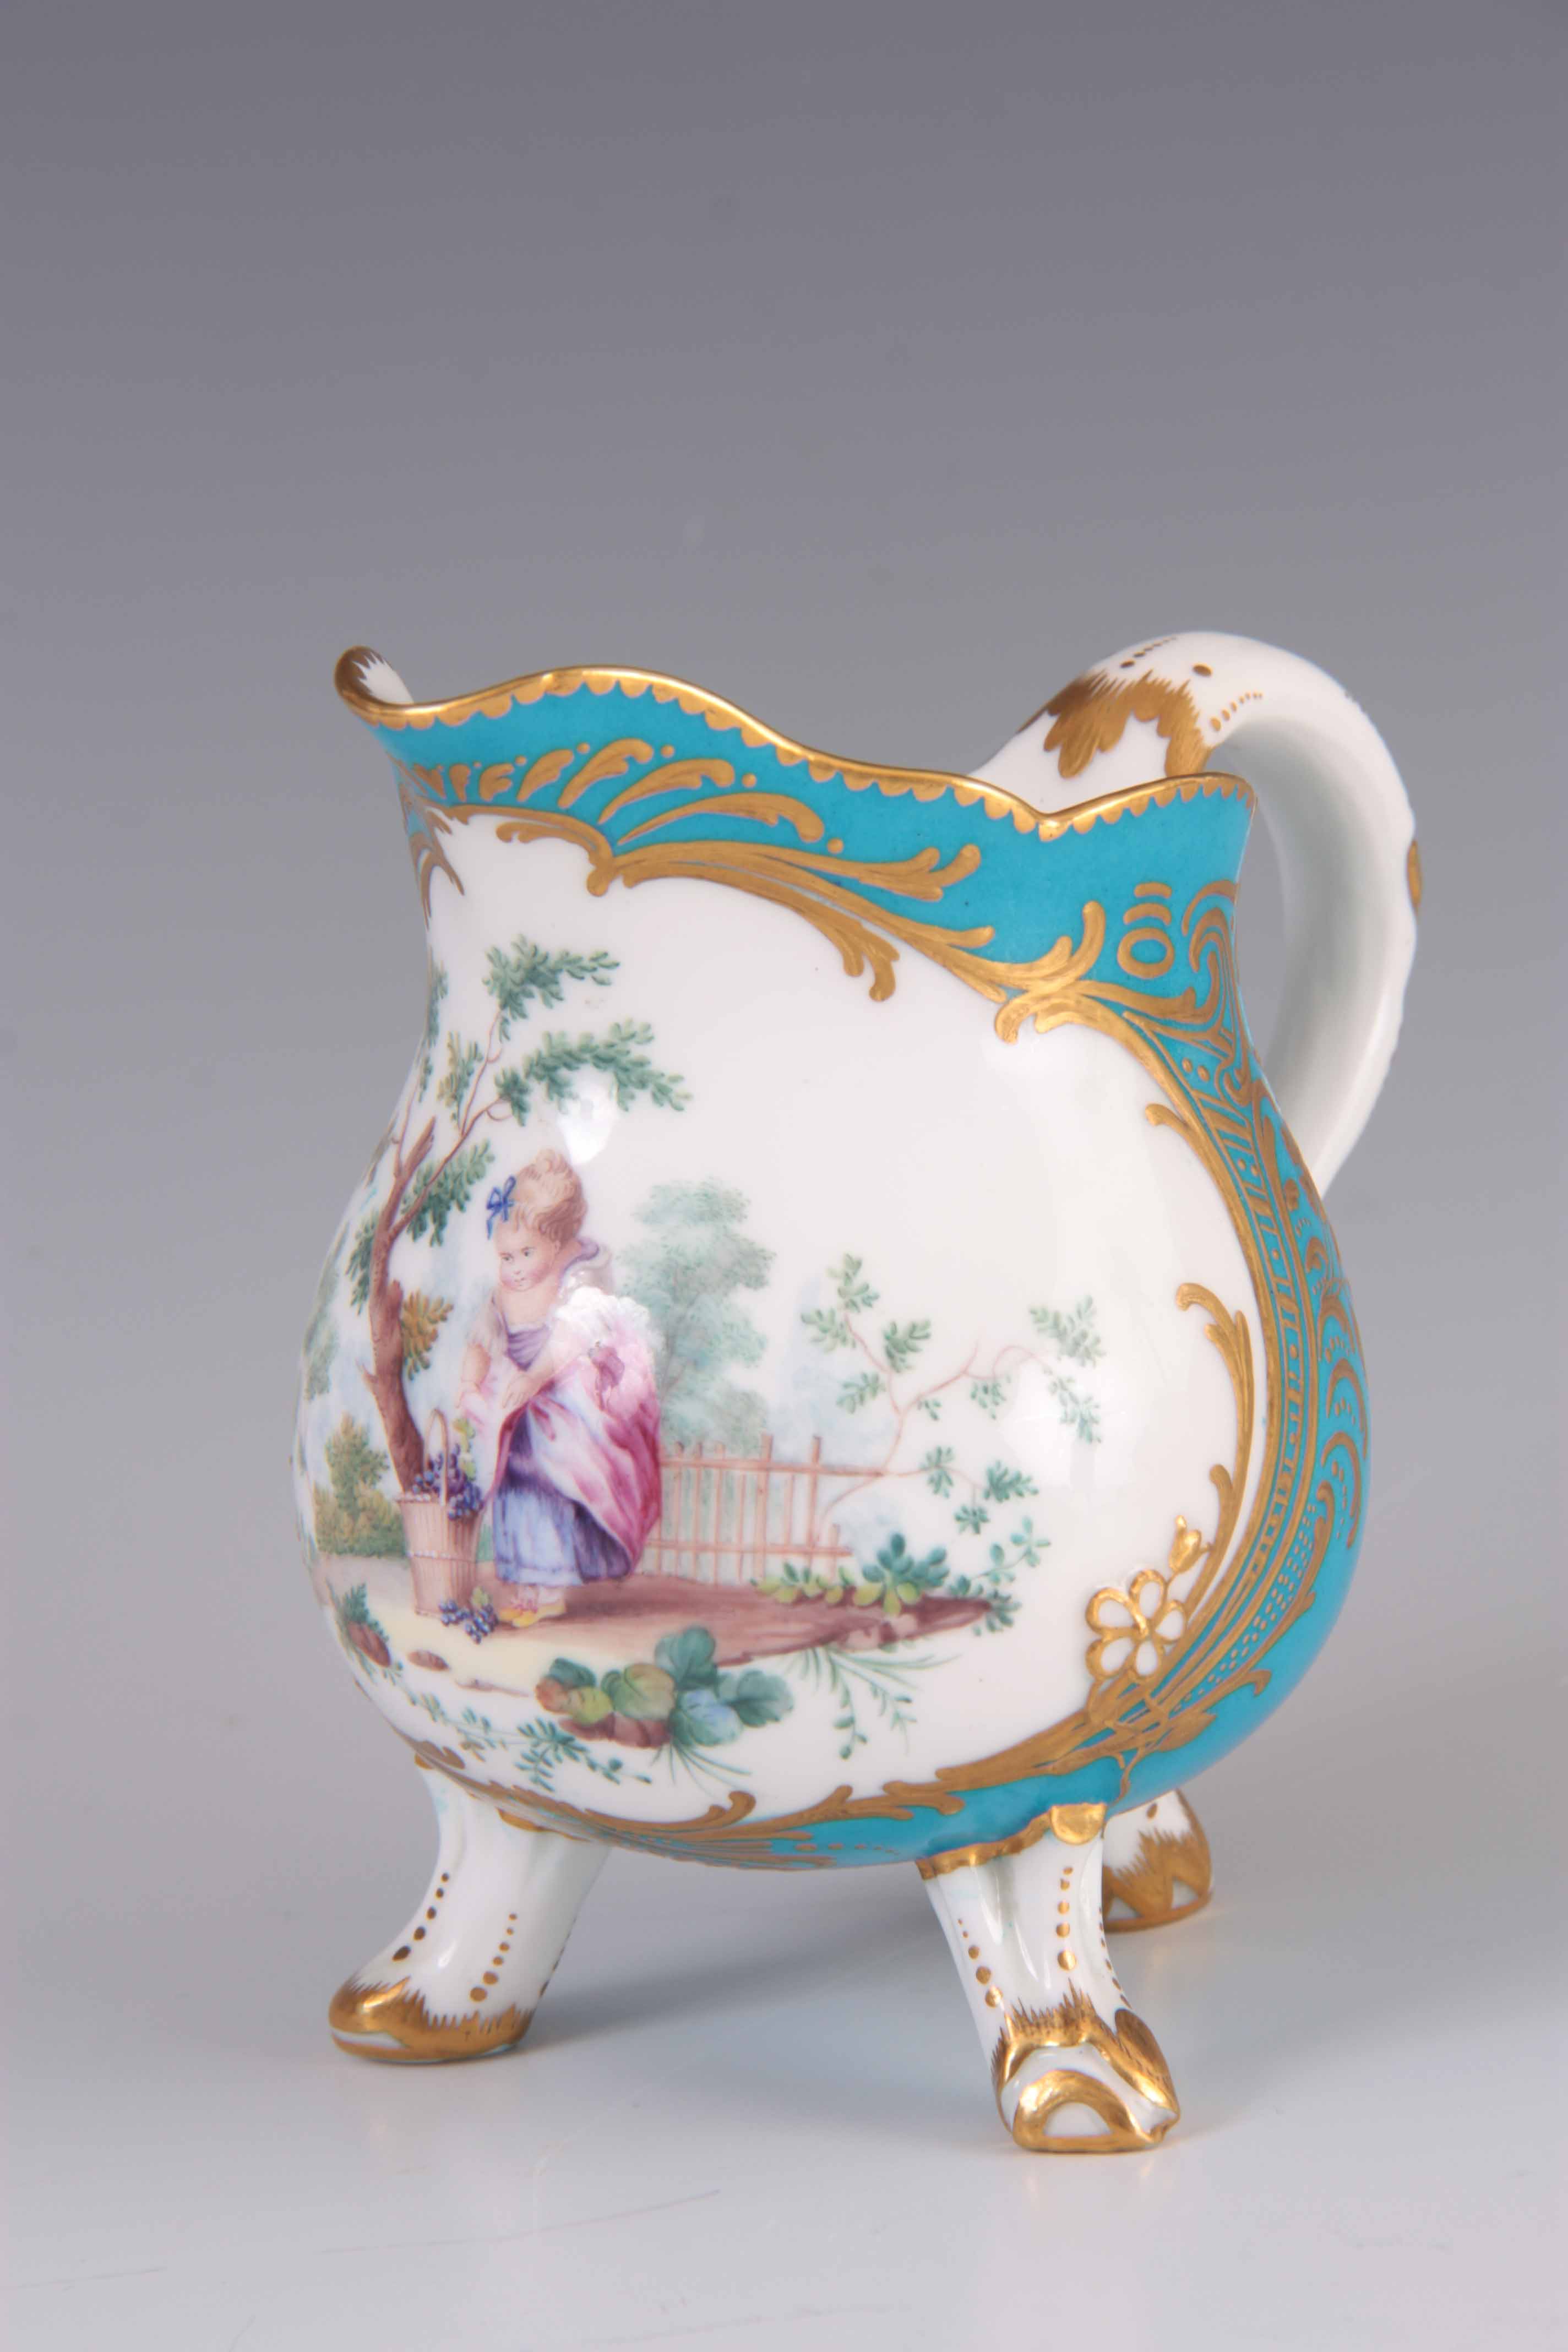 A FINE 19TH CENTURY SEVRES PORCELAIN CREAM JUG of shaped form standing on three branch work feet, - Image 7 of 7